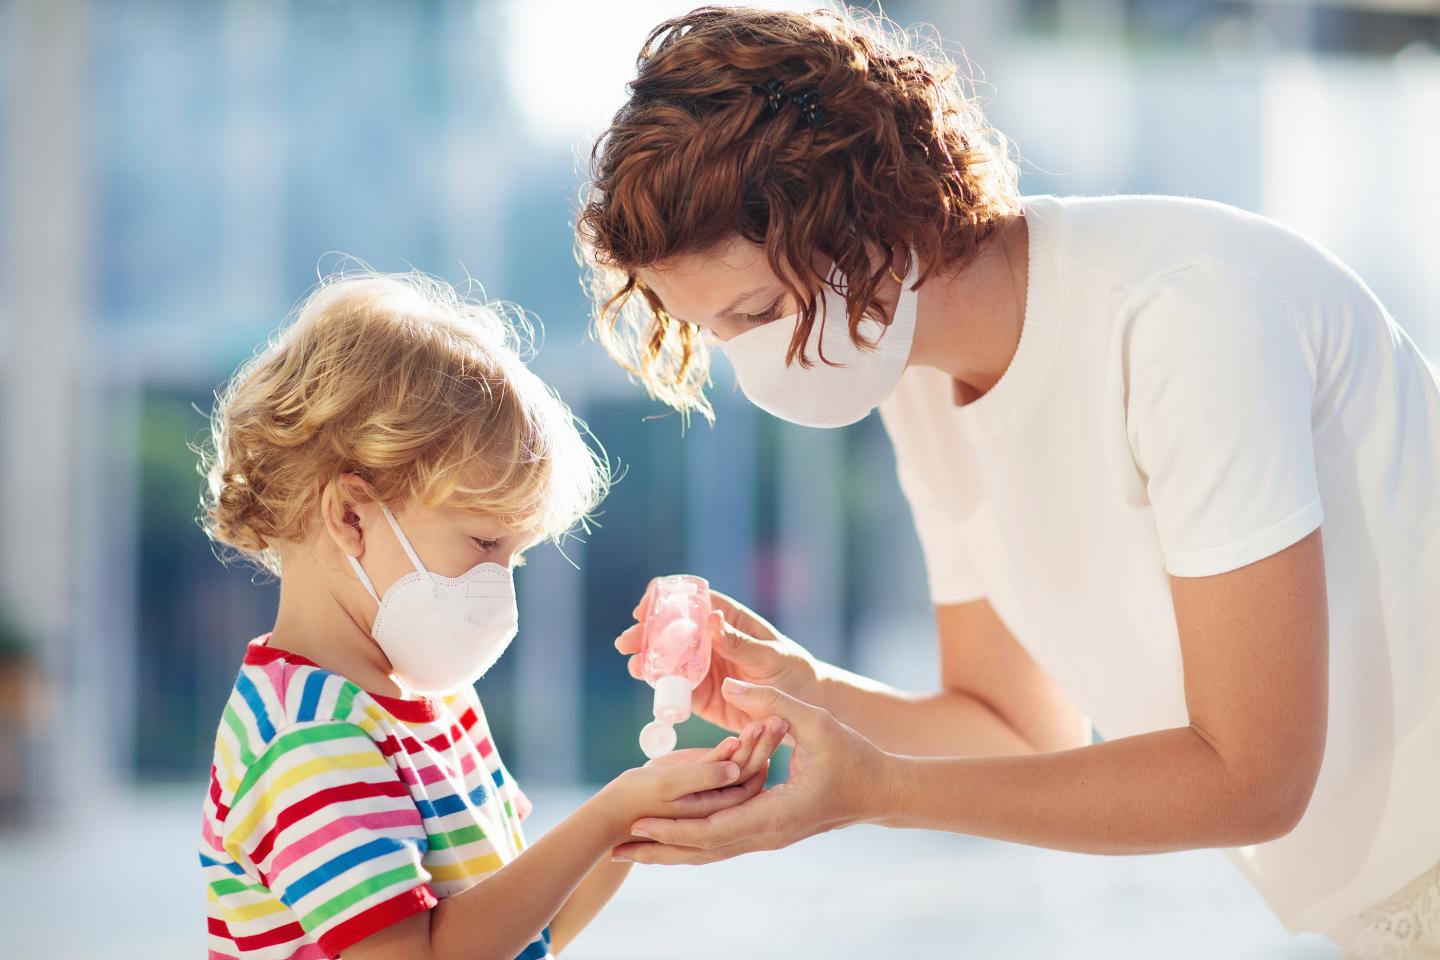 Mother and Child with hand sanitizers. Both wearing masks.